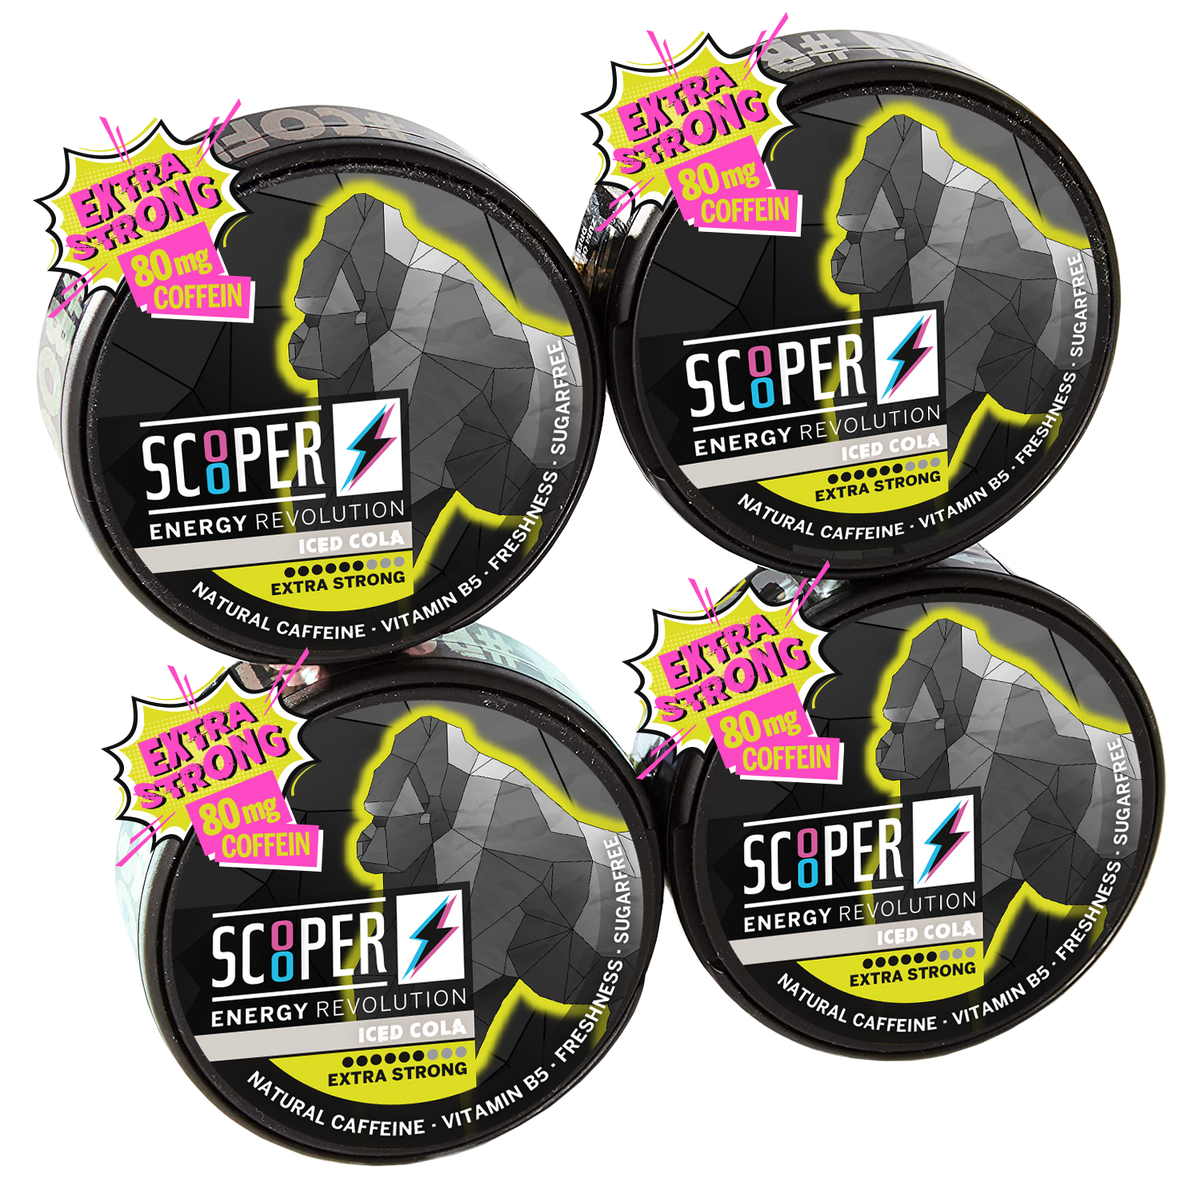 SCOOPER Energy Iced Cola Extra Strong Box (4 cans)